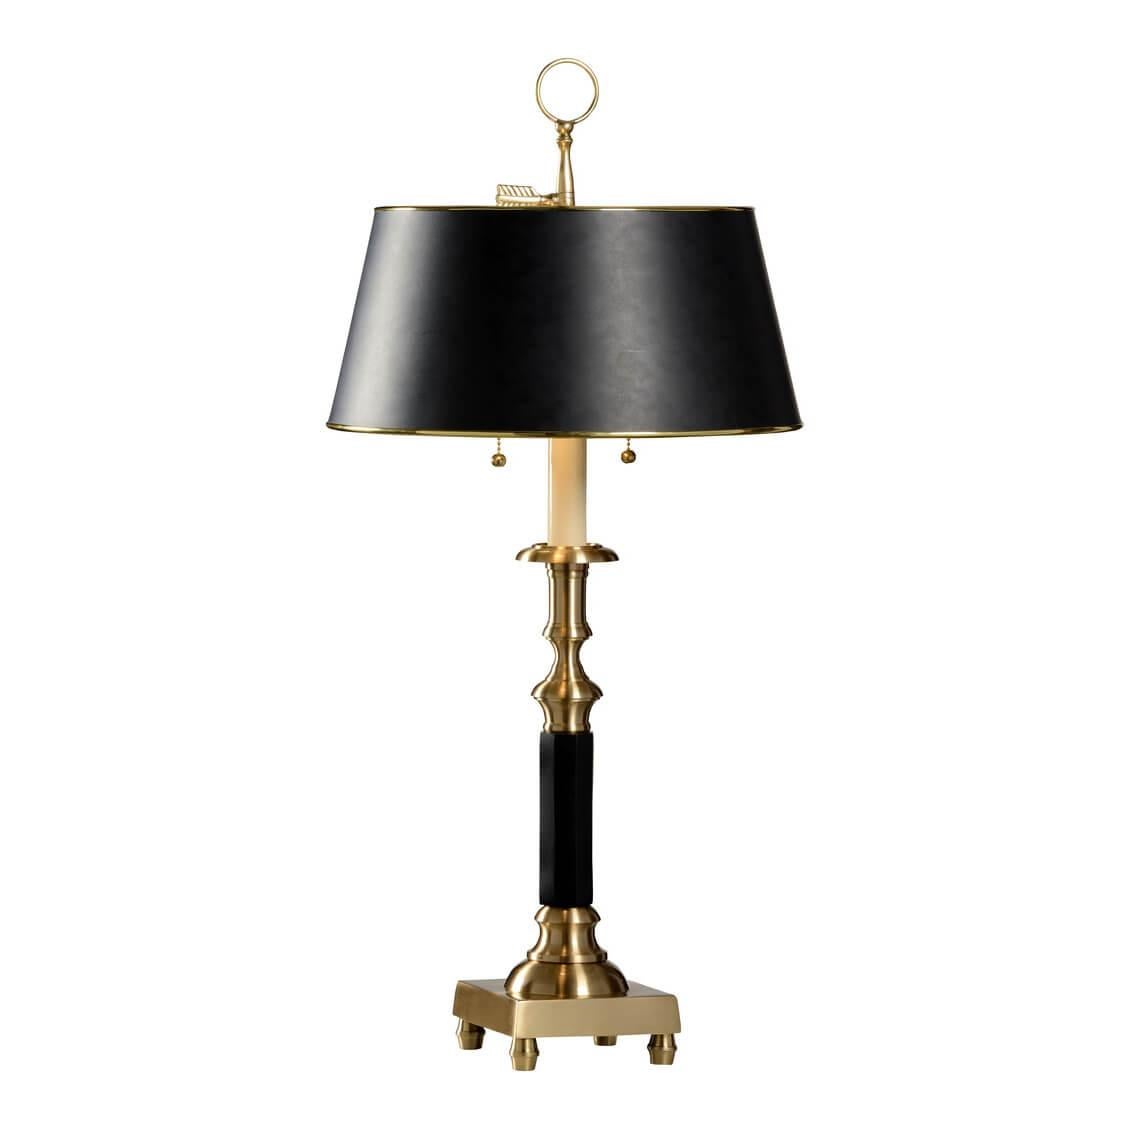 French Neo-Classic Empire style candlestick table lamps with hand finished cast brass and a parchment shade.

Dimensions: 32